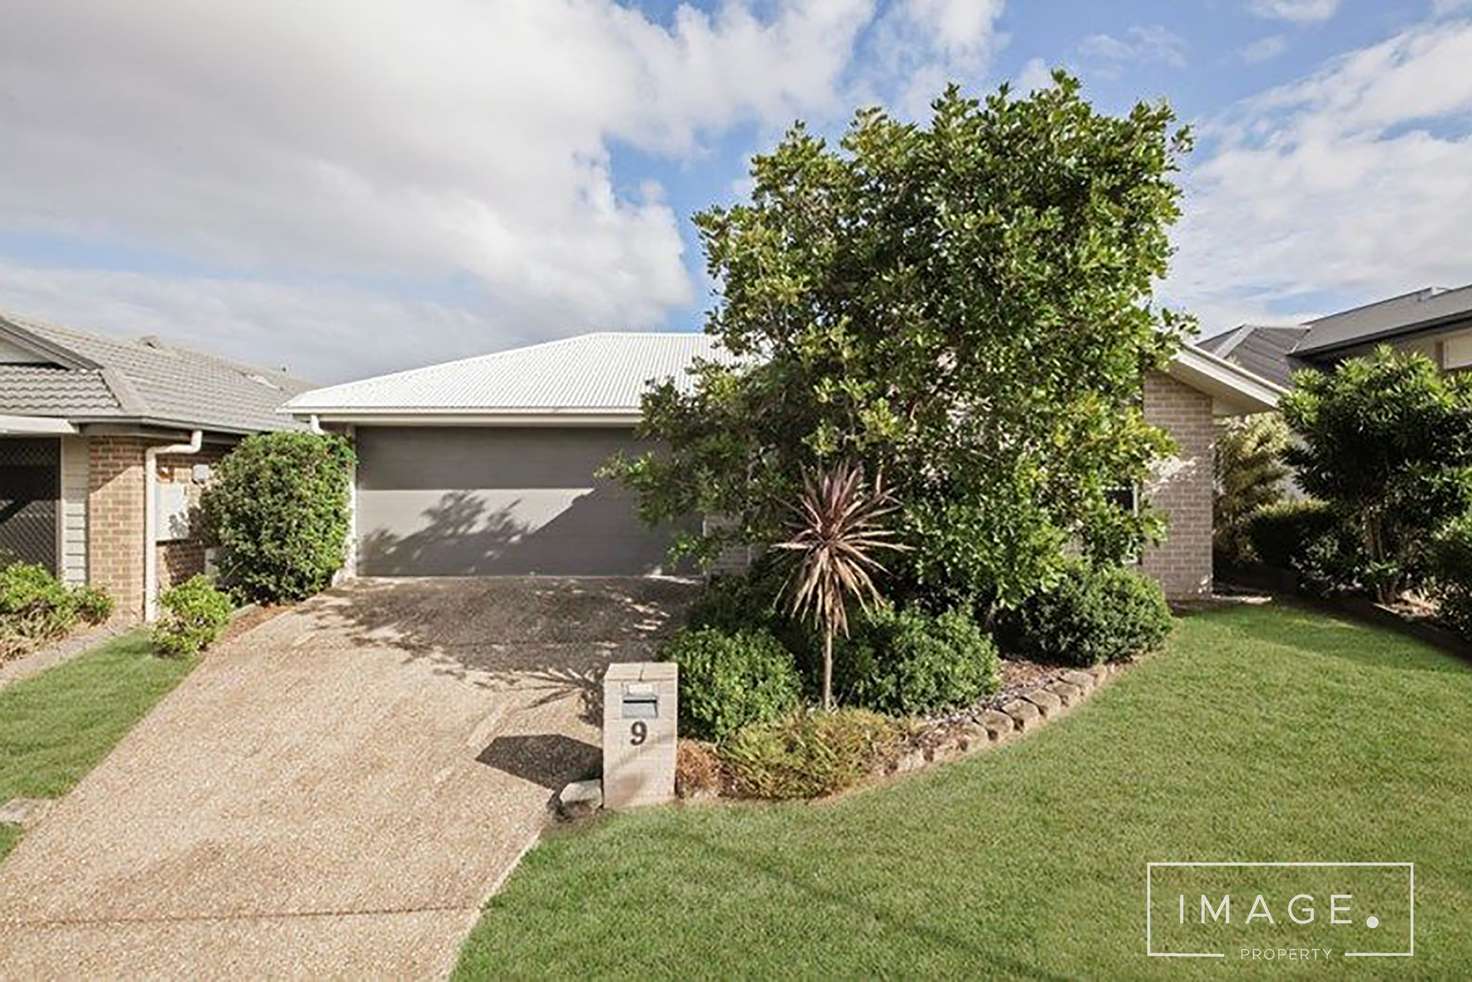 Main view of Homely house listing, 9 MELDRUM STREET, Kallangur QLD 4503